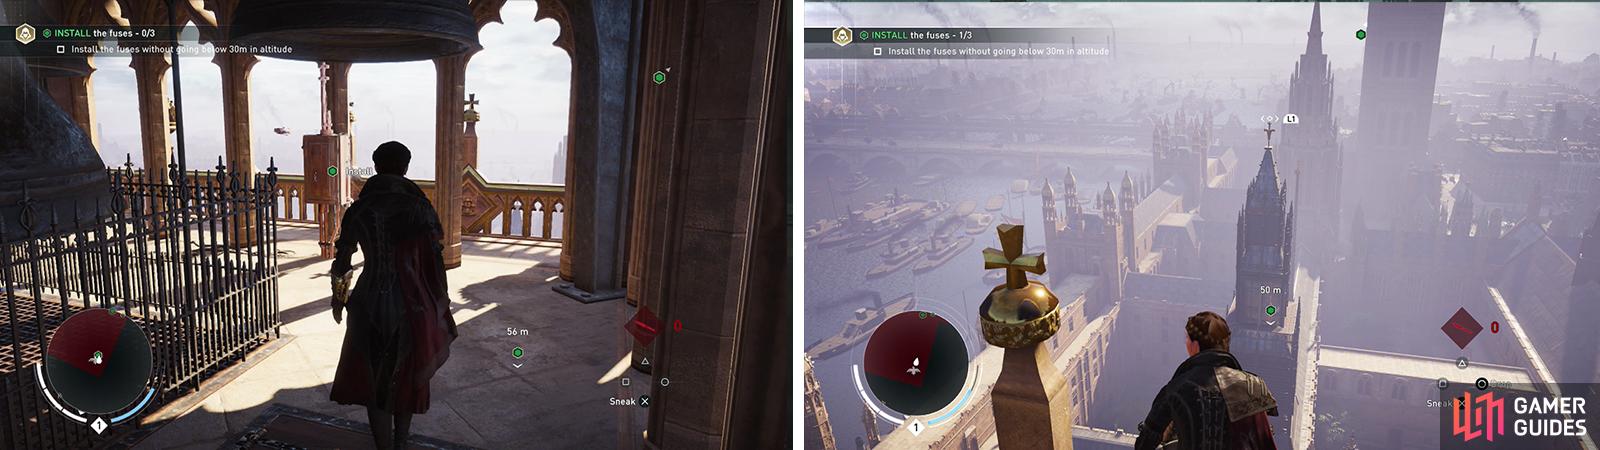 You’ll need to disable three fuses (left). Use the rope launcher between the spires to stay above 30 meters (right).